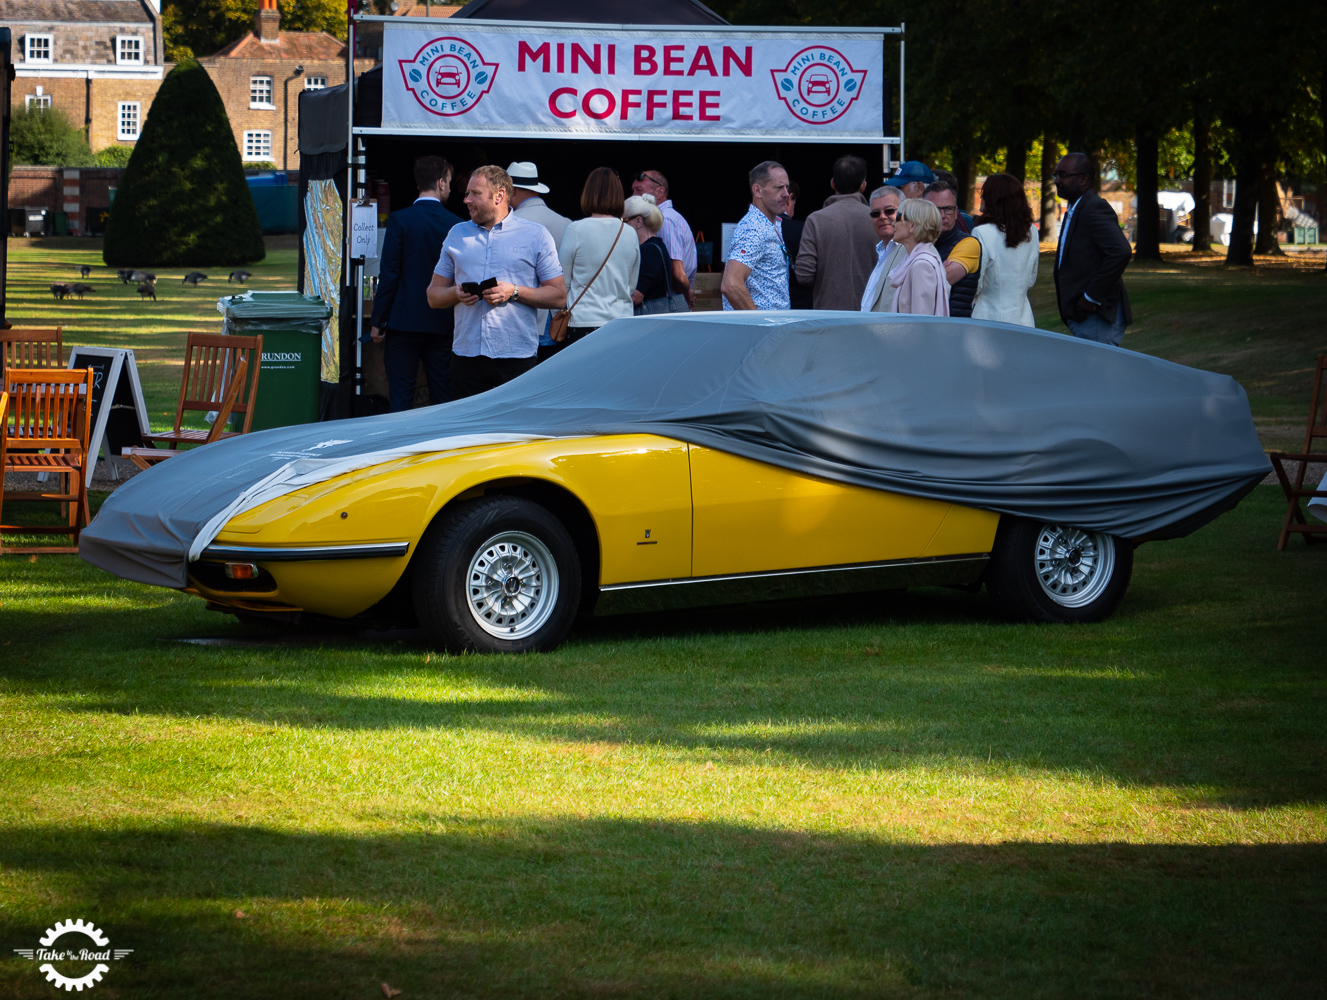 Concours of Elegance Hampton Court Palace Highlights 2019